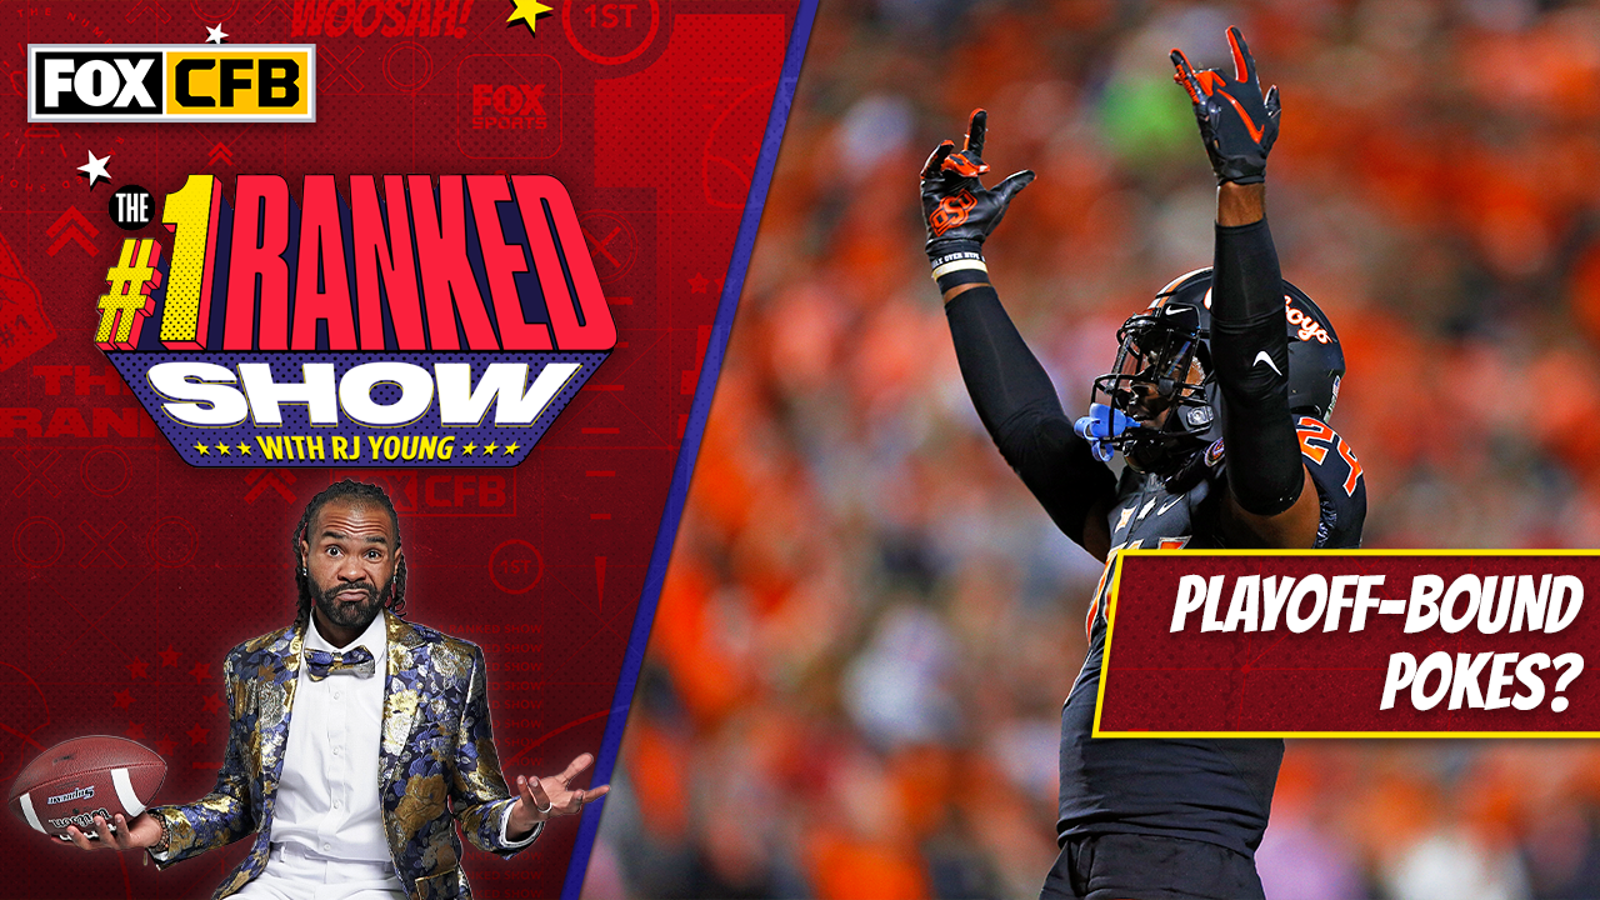 Can Oklahoma State make the CFP? | No. 1 Ranked Show